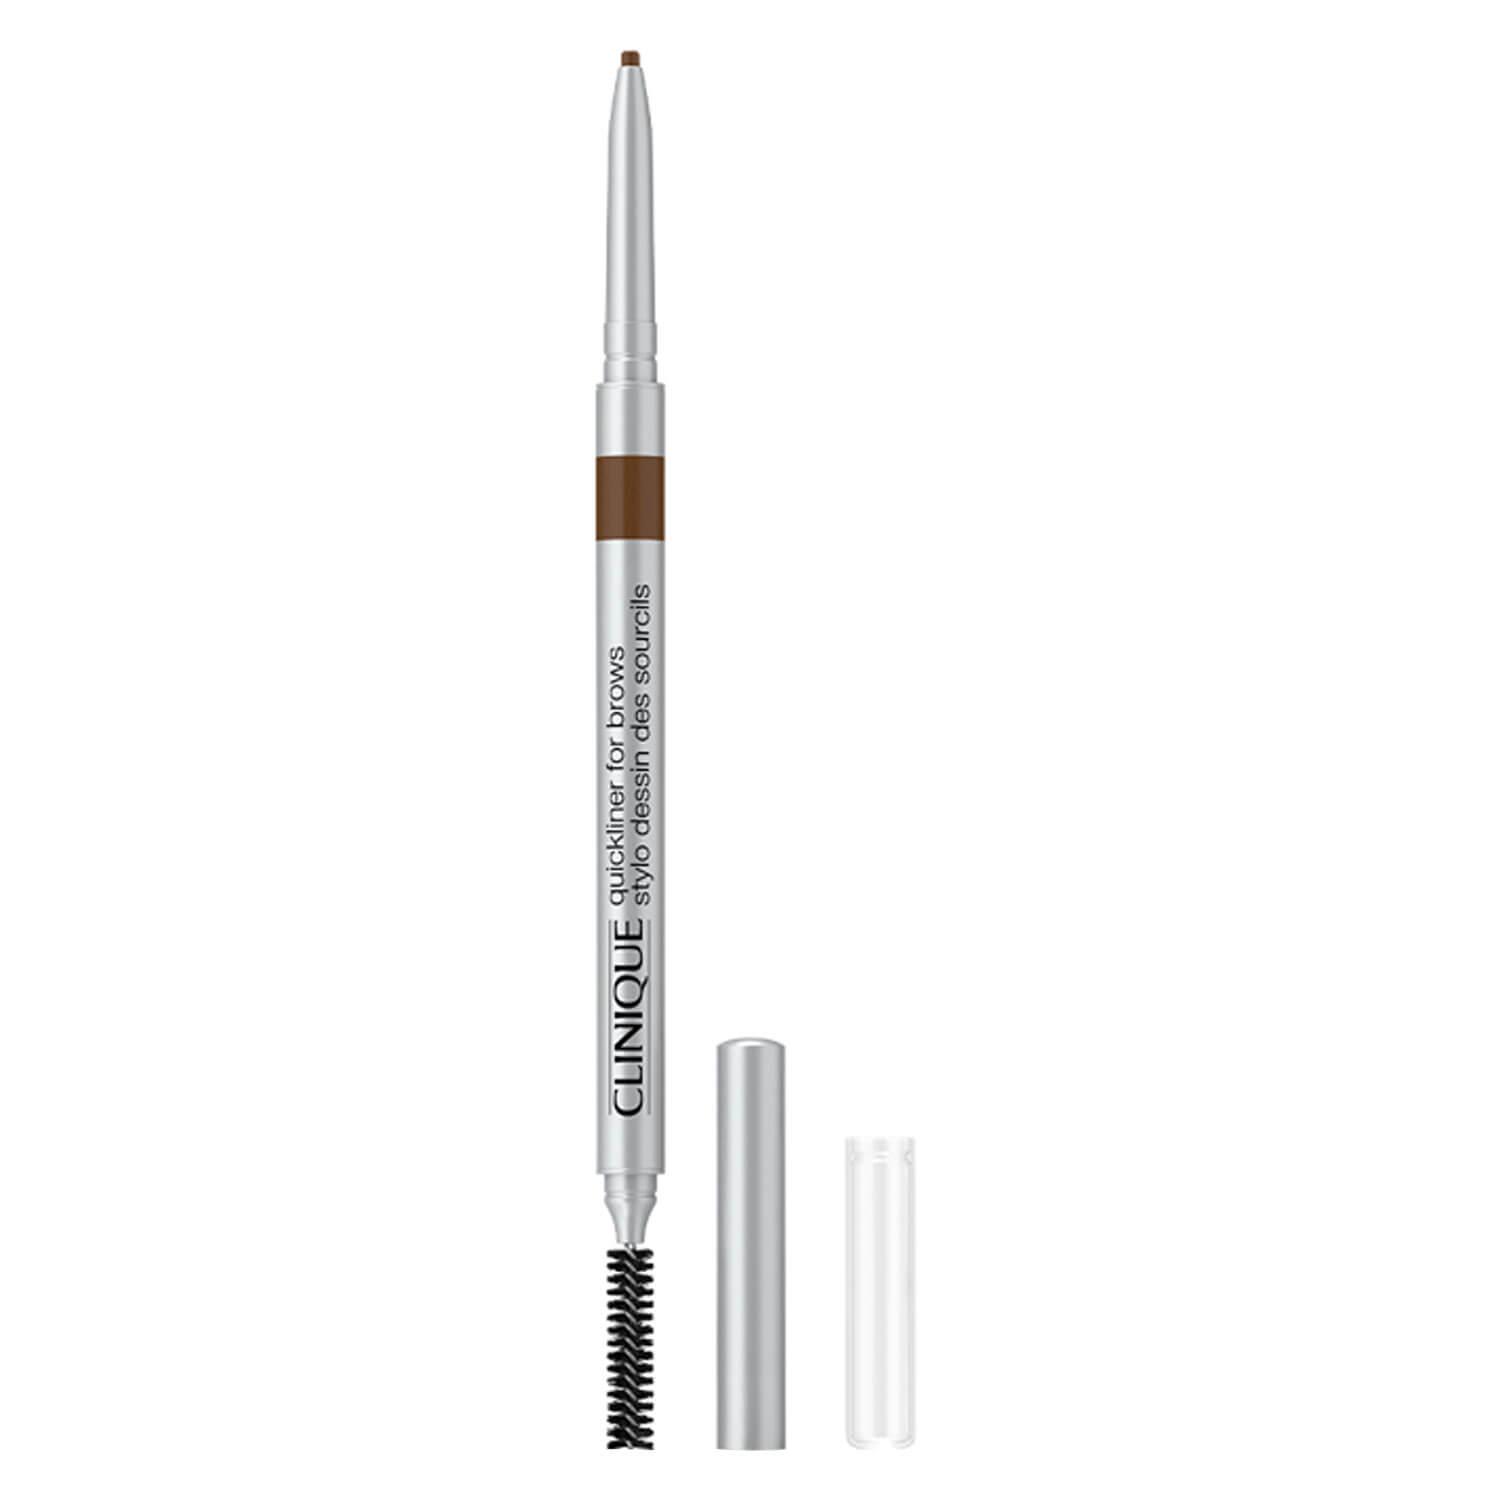 Quickliner For Brows - 04 Deep Brown